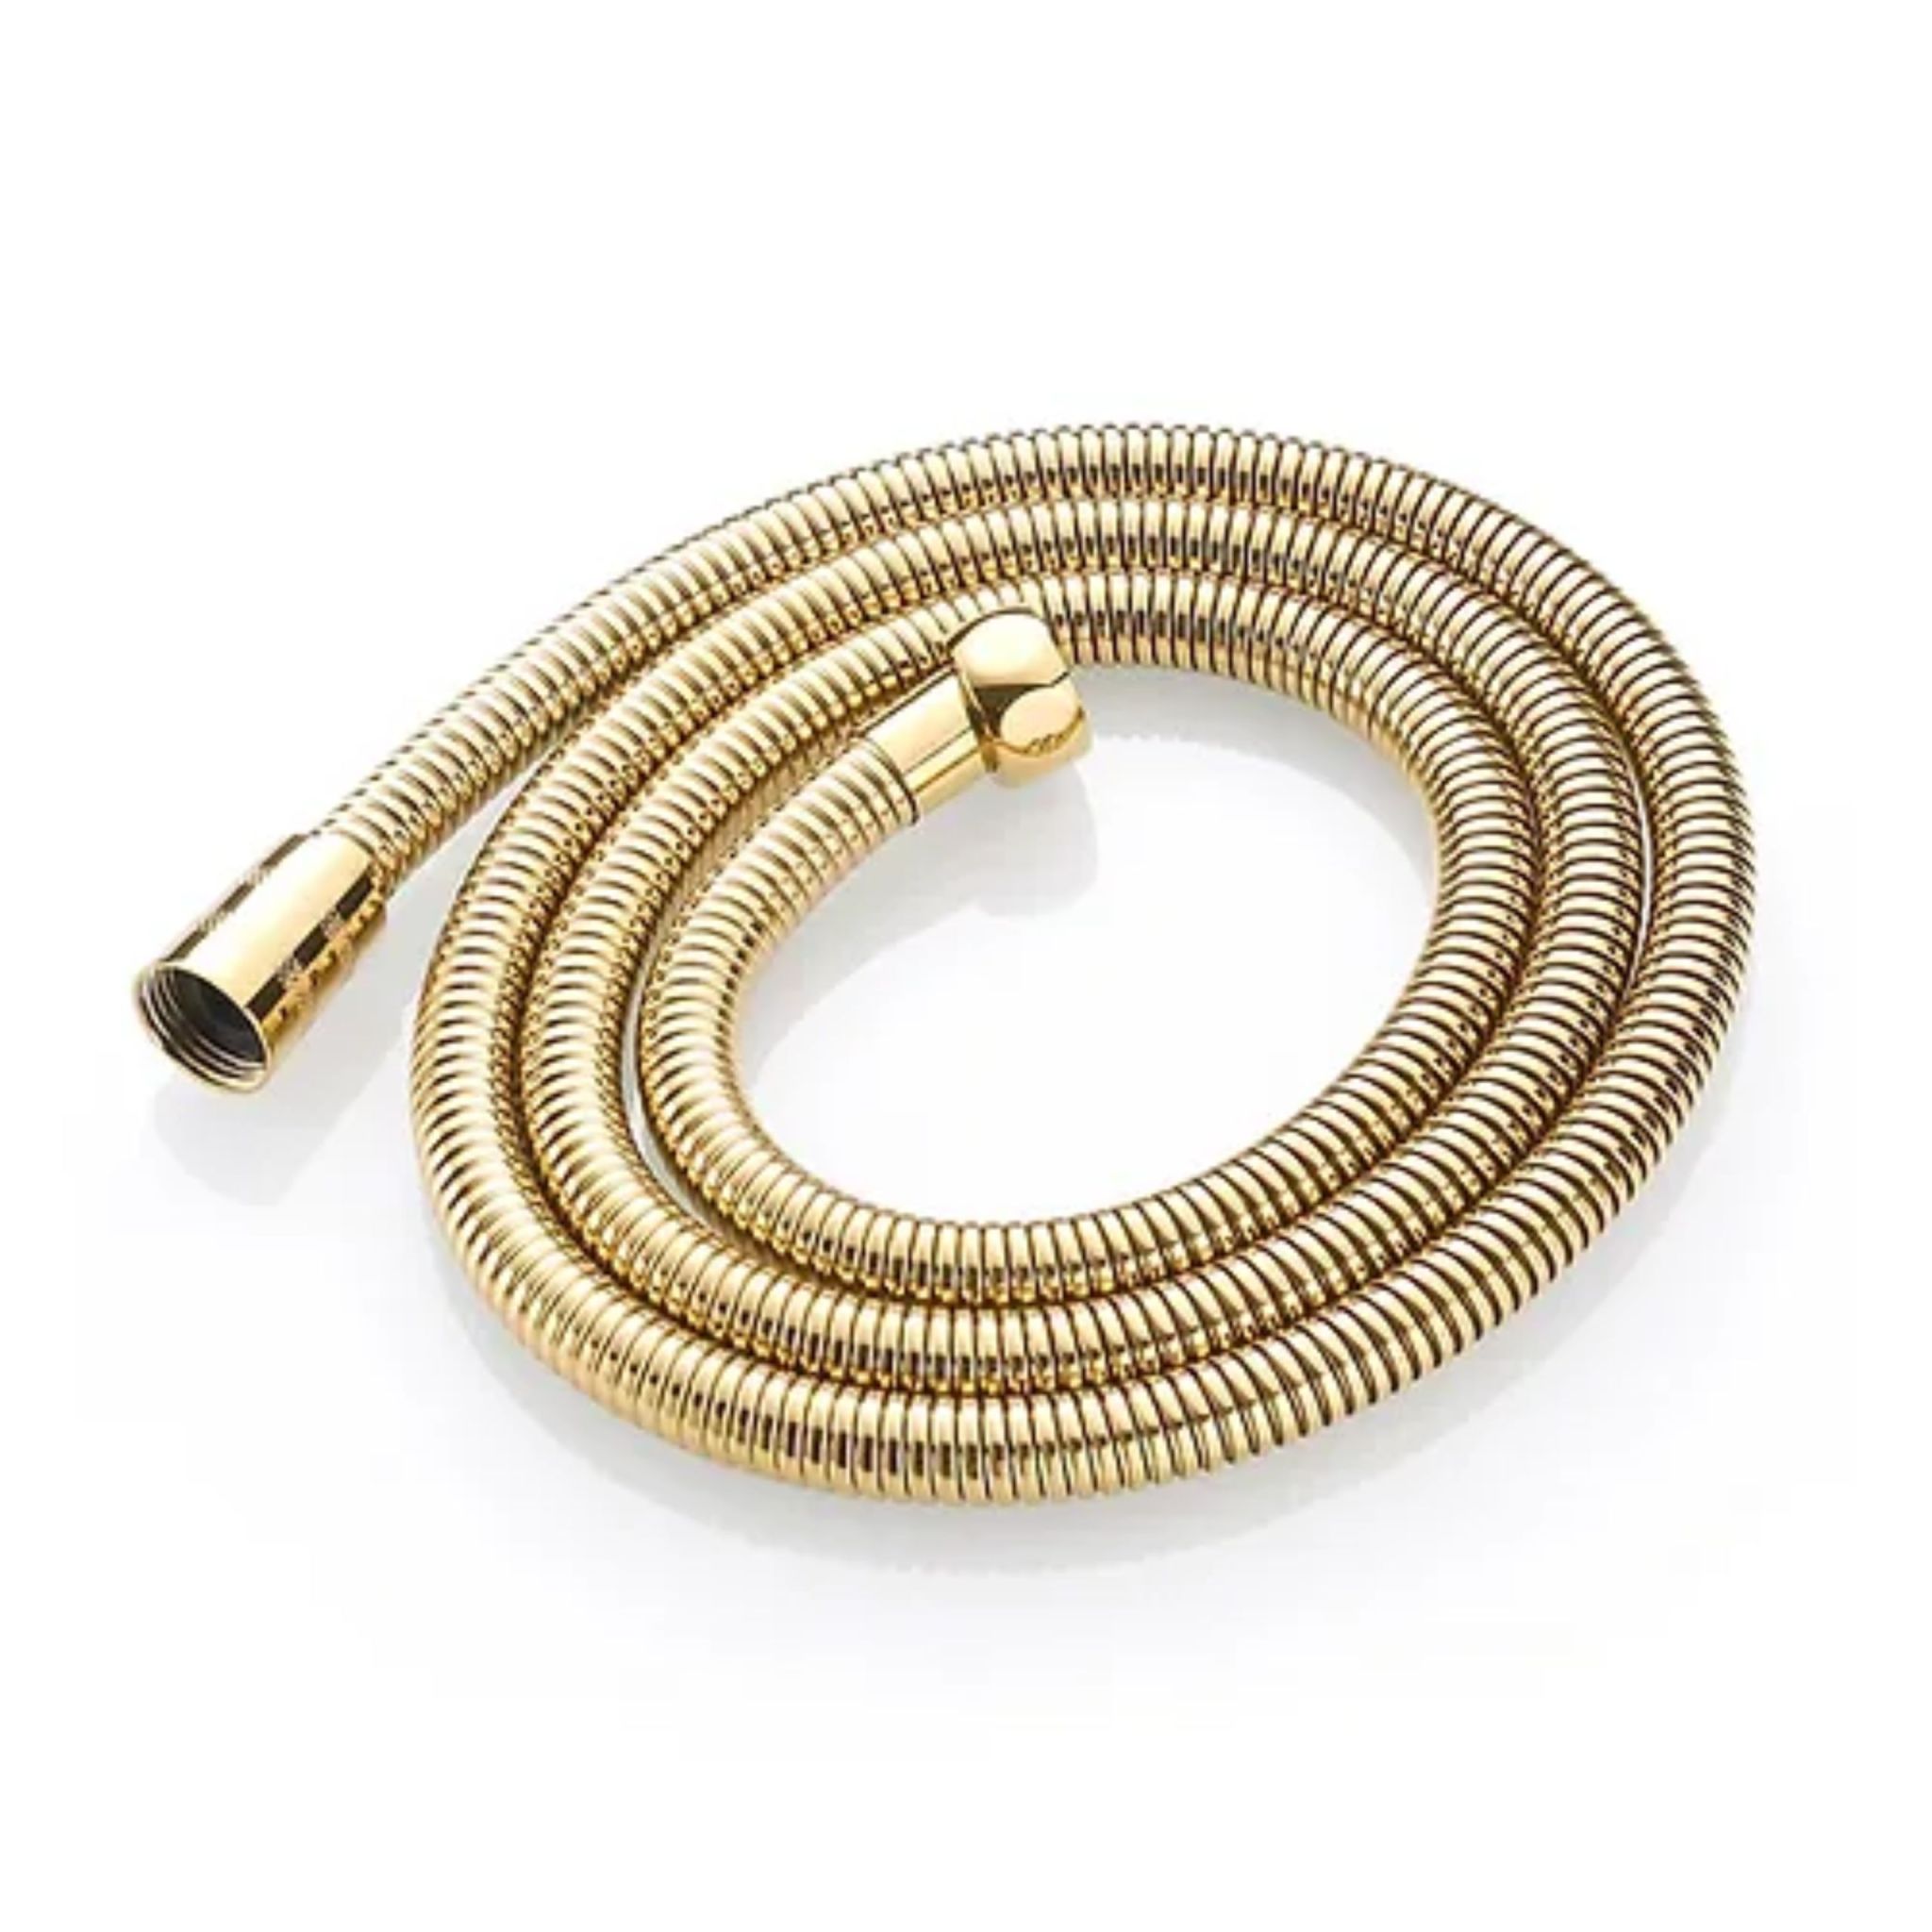 1.5m Gold Stainless Steel Flexi Shower Hose